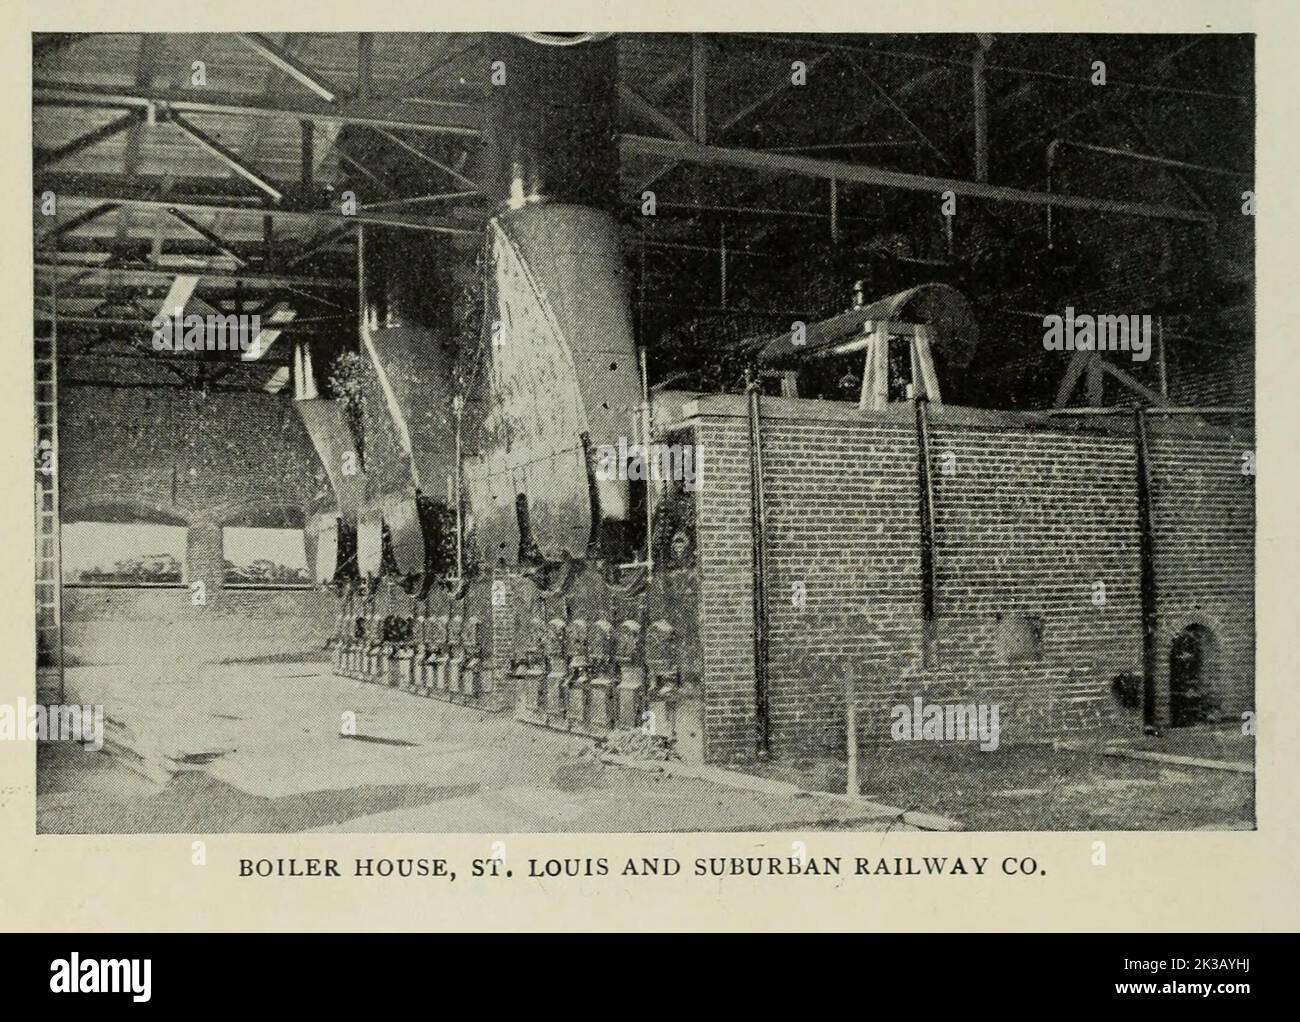 BOILER HOUSE, ST. LOUIS AND SUBURBAN RAILWAY CO. from the Article THE STREET RAILWAYS OF ST. LOUIS, Missouri By William H. Bryan, M. E. from The Engineering Magazine DEVOTED TO INDUSTRIAL PROGRESS Volume VIII April to September, 1895 NEW YORK The Engineering Magazine Co Stock Photo